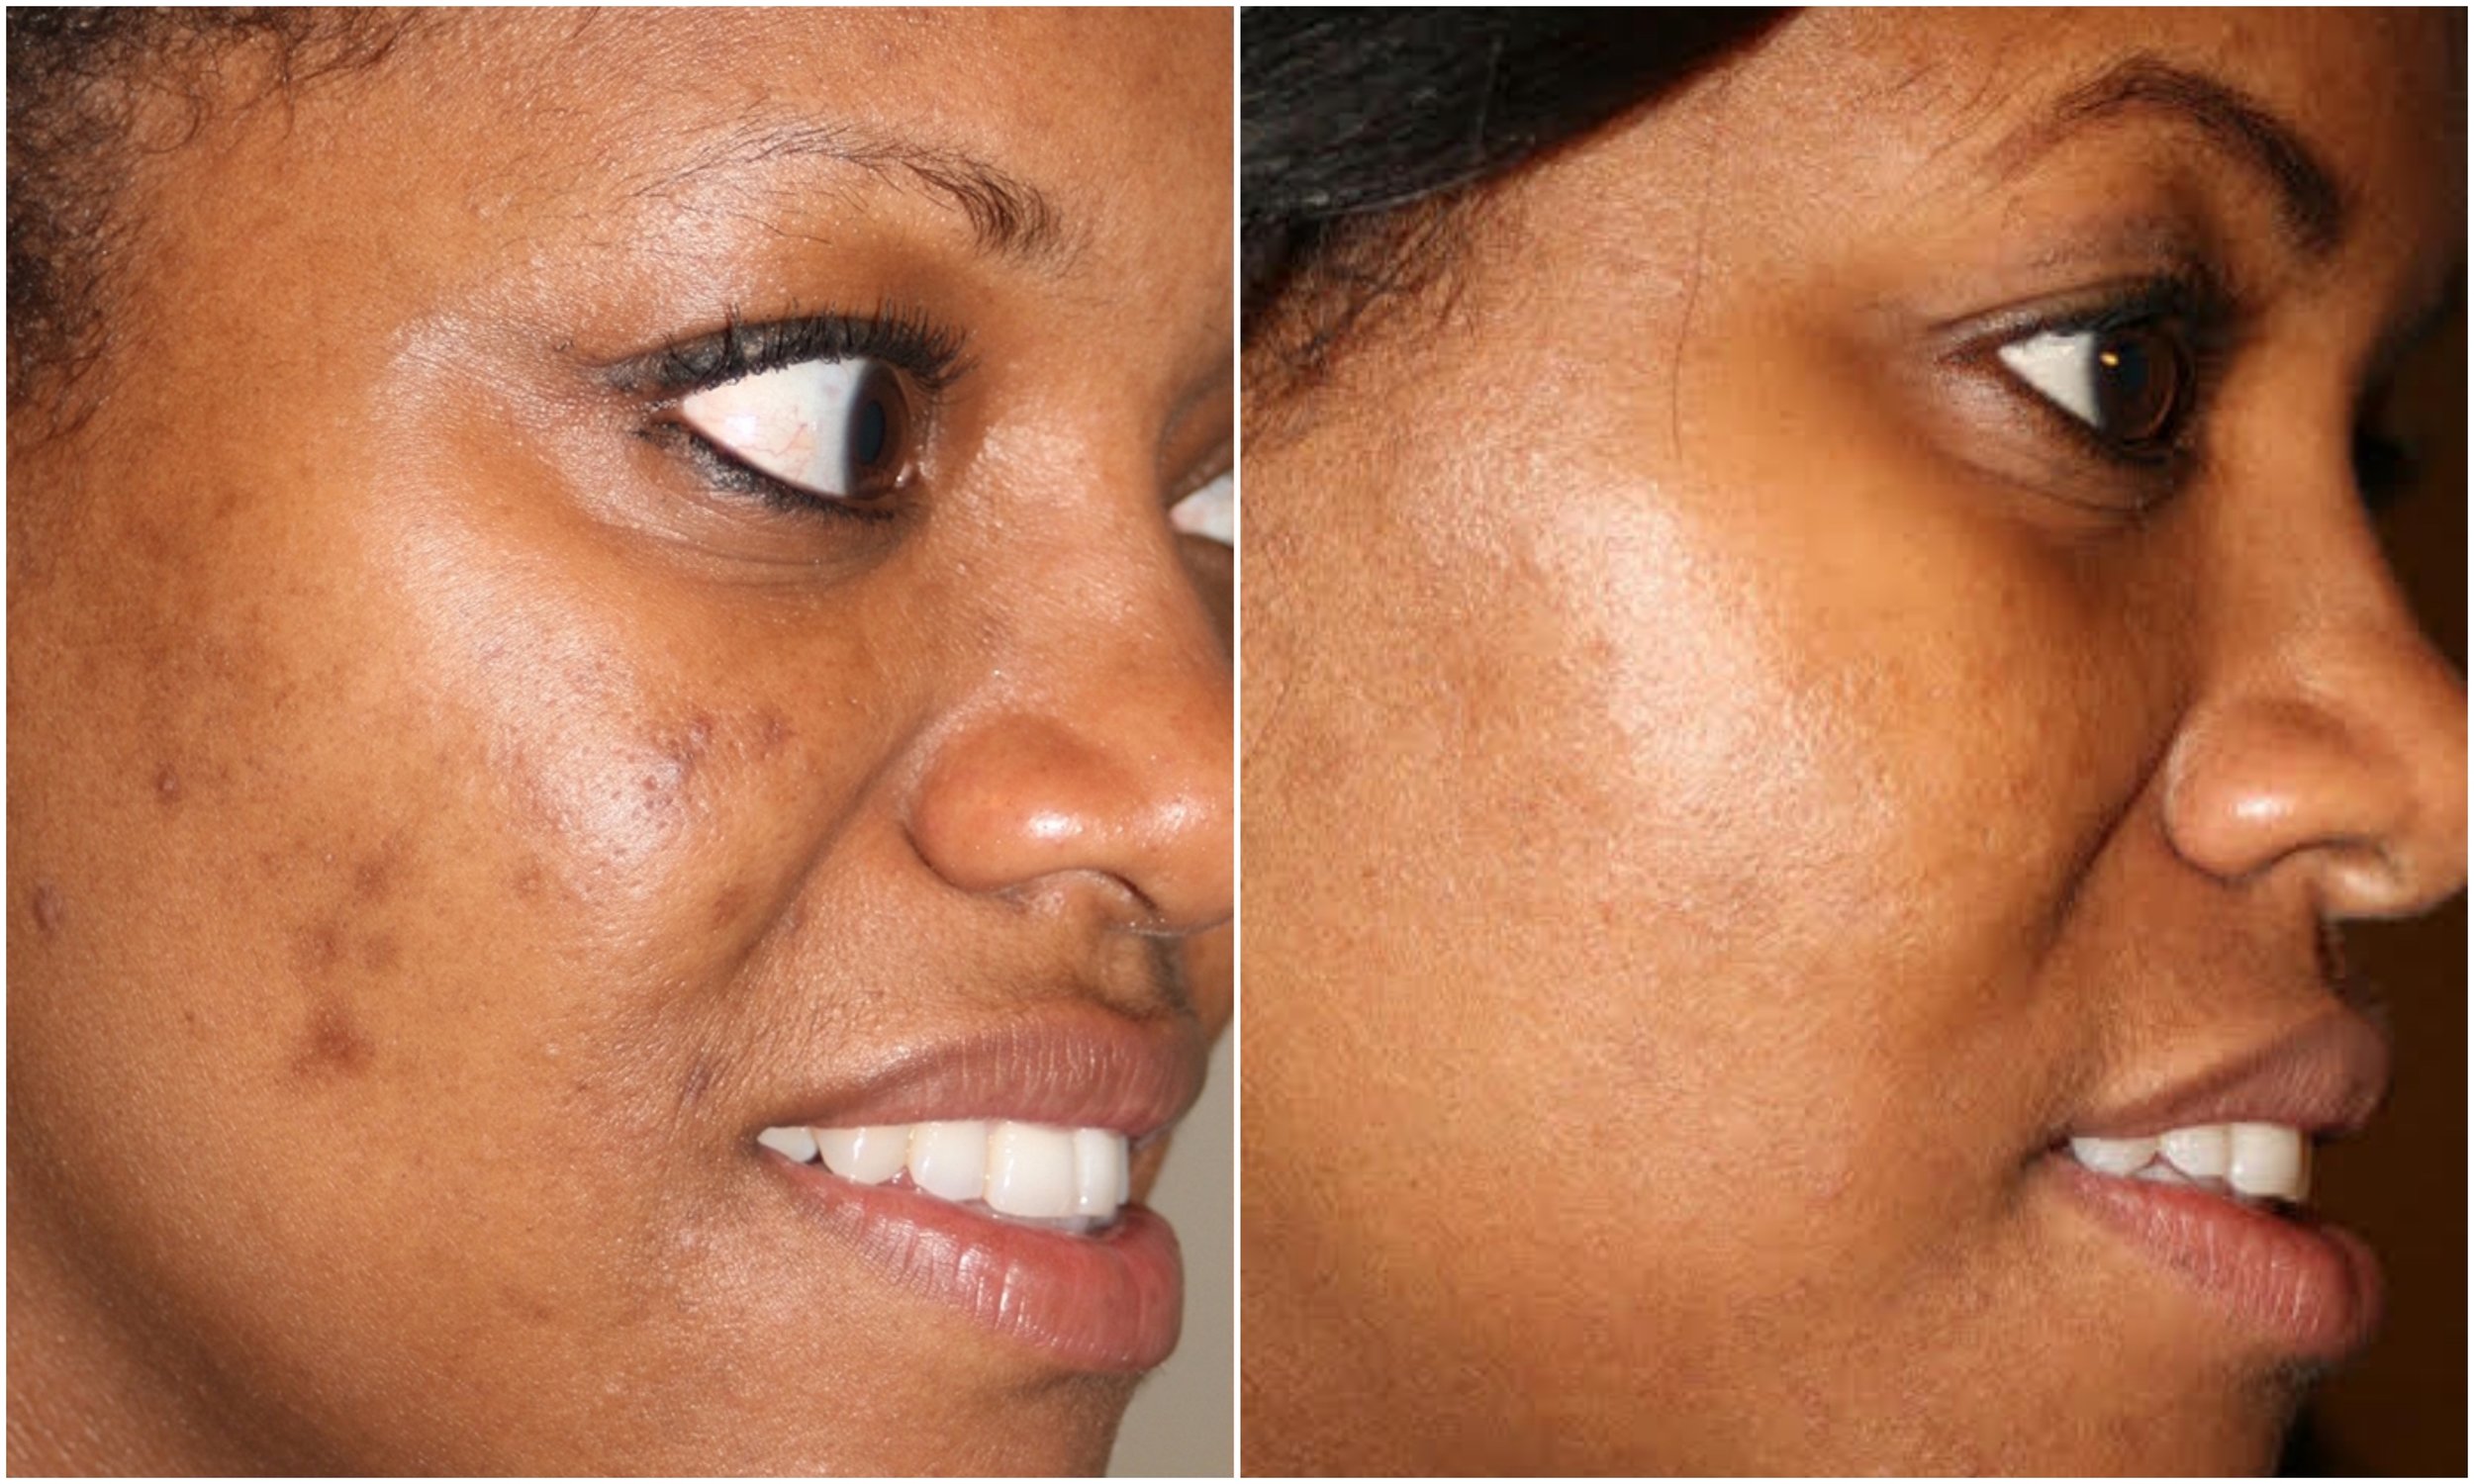   Blemishes cleared, tone/texture cleared using Perfect Derma Peel (Intense Peel)  